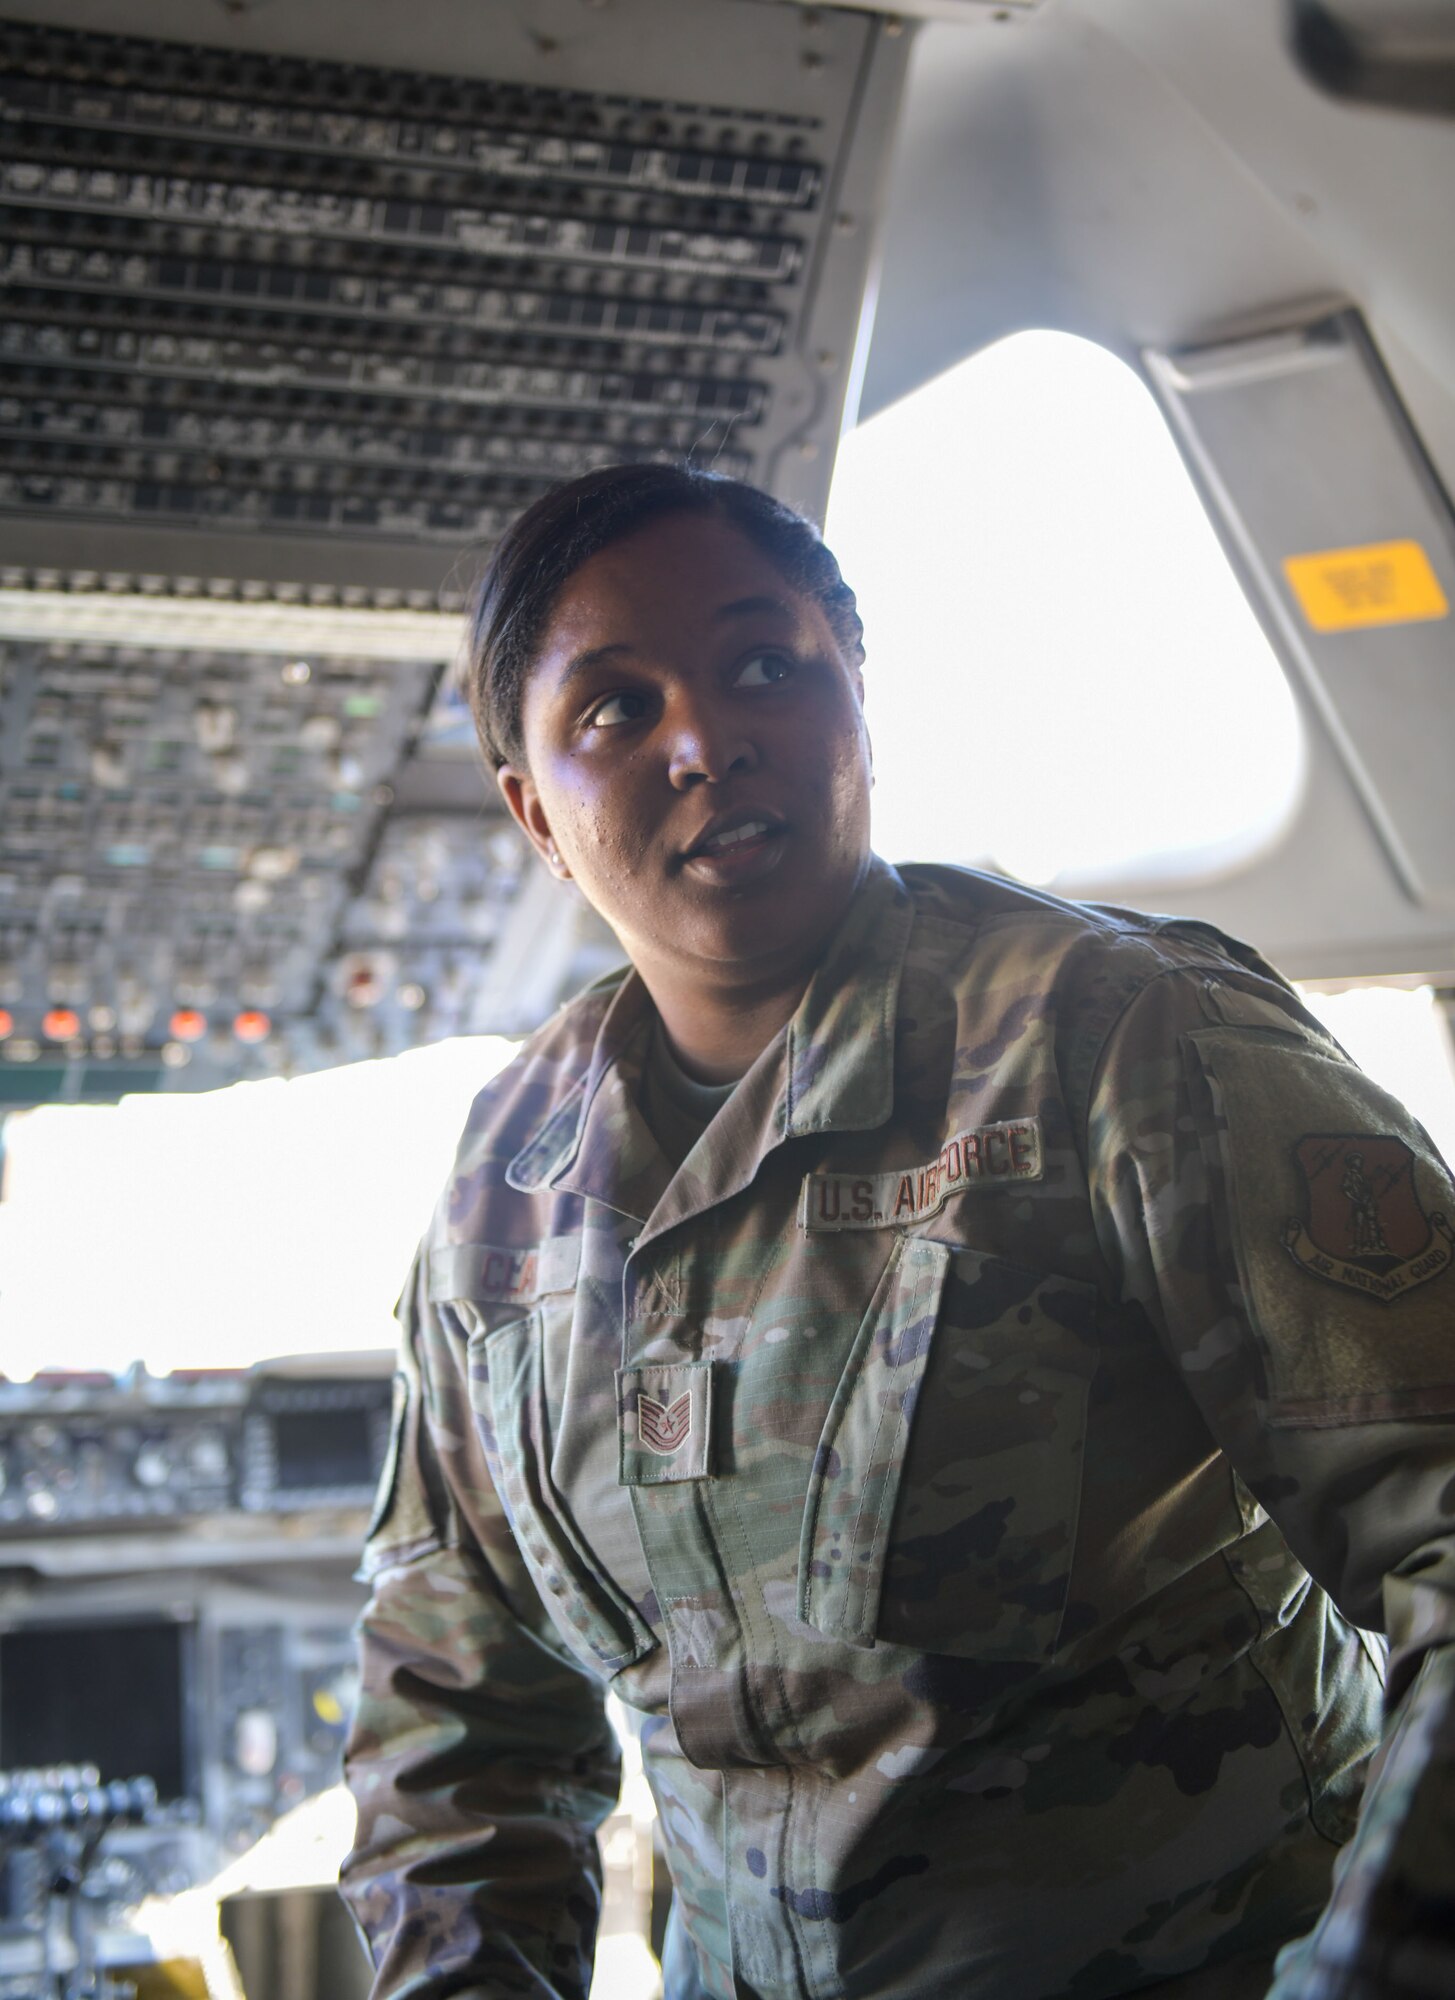 Tech. Sgt. Asia Clay, an aircrew flight equipment technician with the 172nd Operations Support Squadron, Jackson, Mississippi, explains features found in the cockpit of a C-17 Globemaster III, Feb 15, 2022.